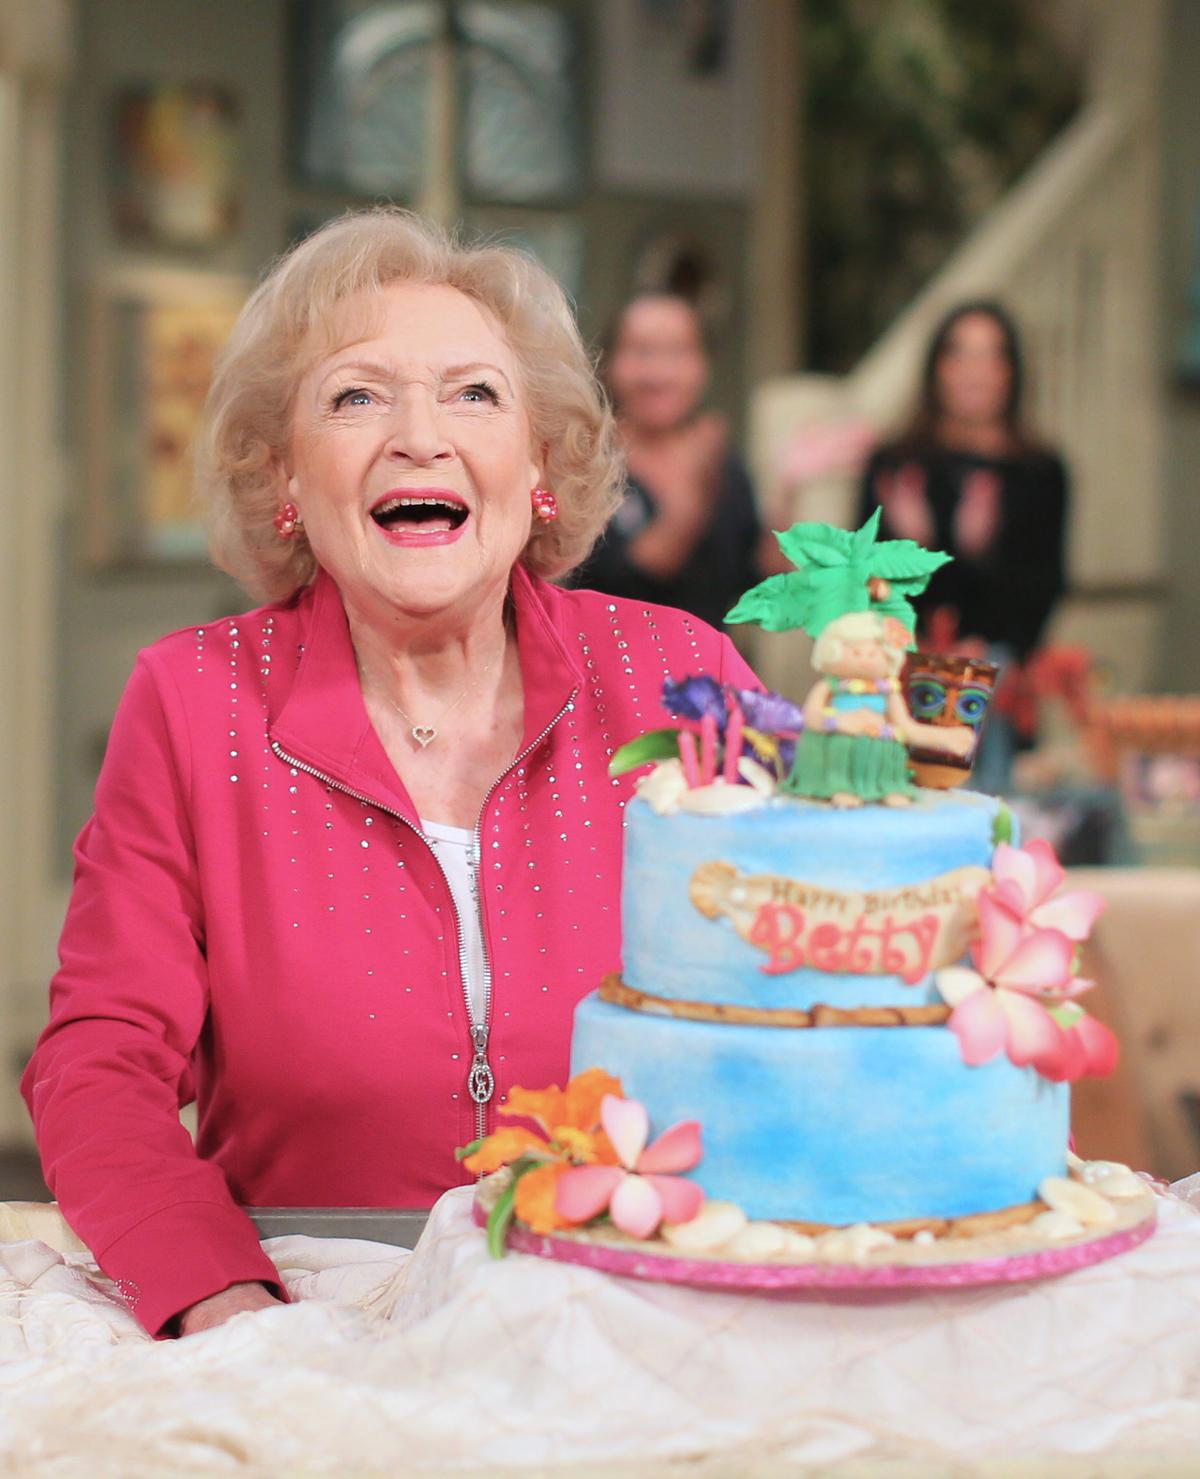 Betty White poses at the celebration of her 93rd birthday on the set of "Hot in Cleveland" at CBS Studios in Studio City, California, on Jan. 16, 2015 (Mark Davis/Getty Images)